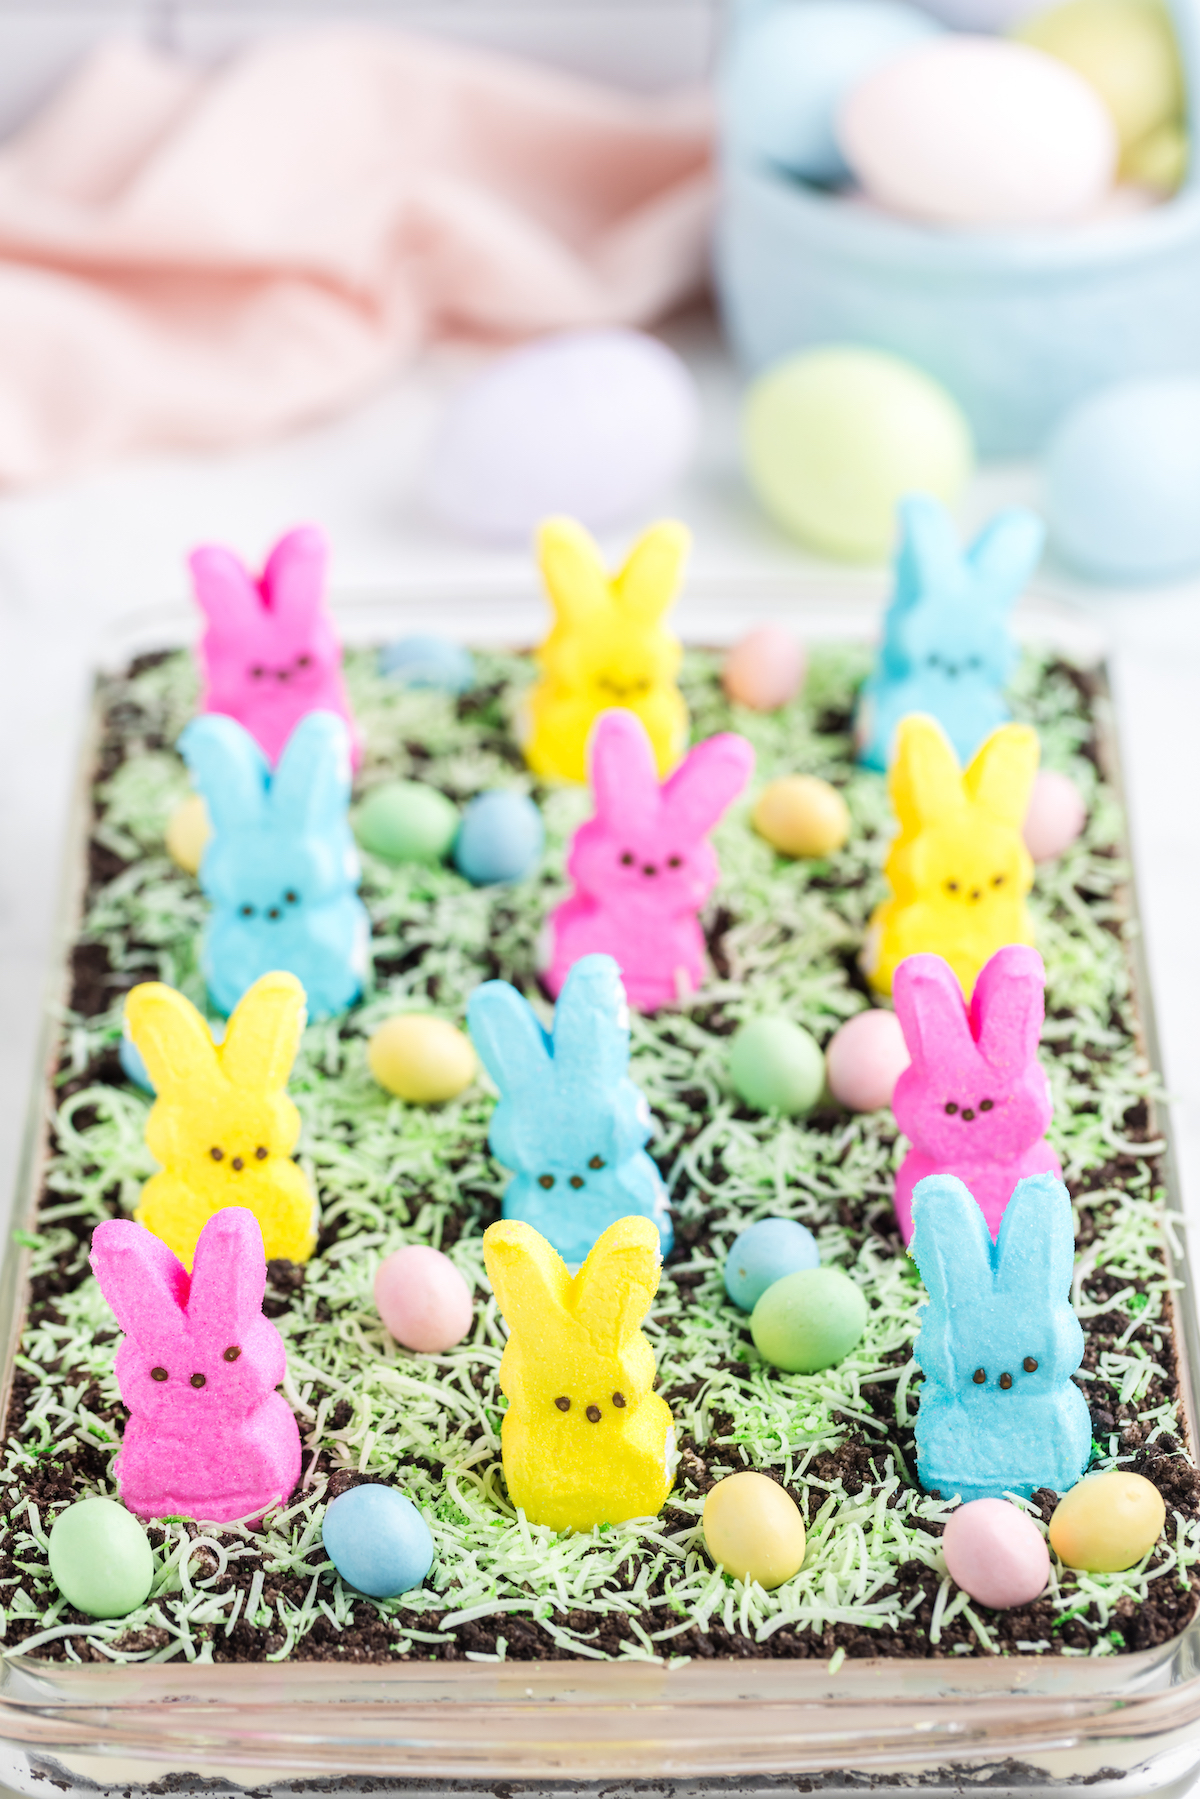 straight on view of a dirt cake decorated with Peeps and candy coated chocolate eggs.